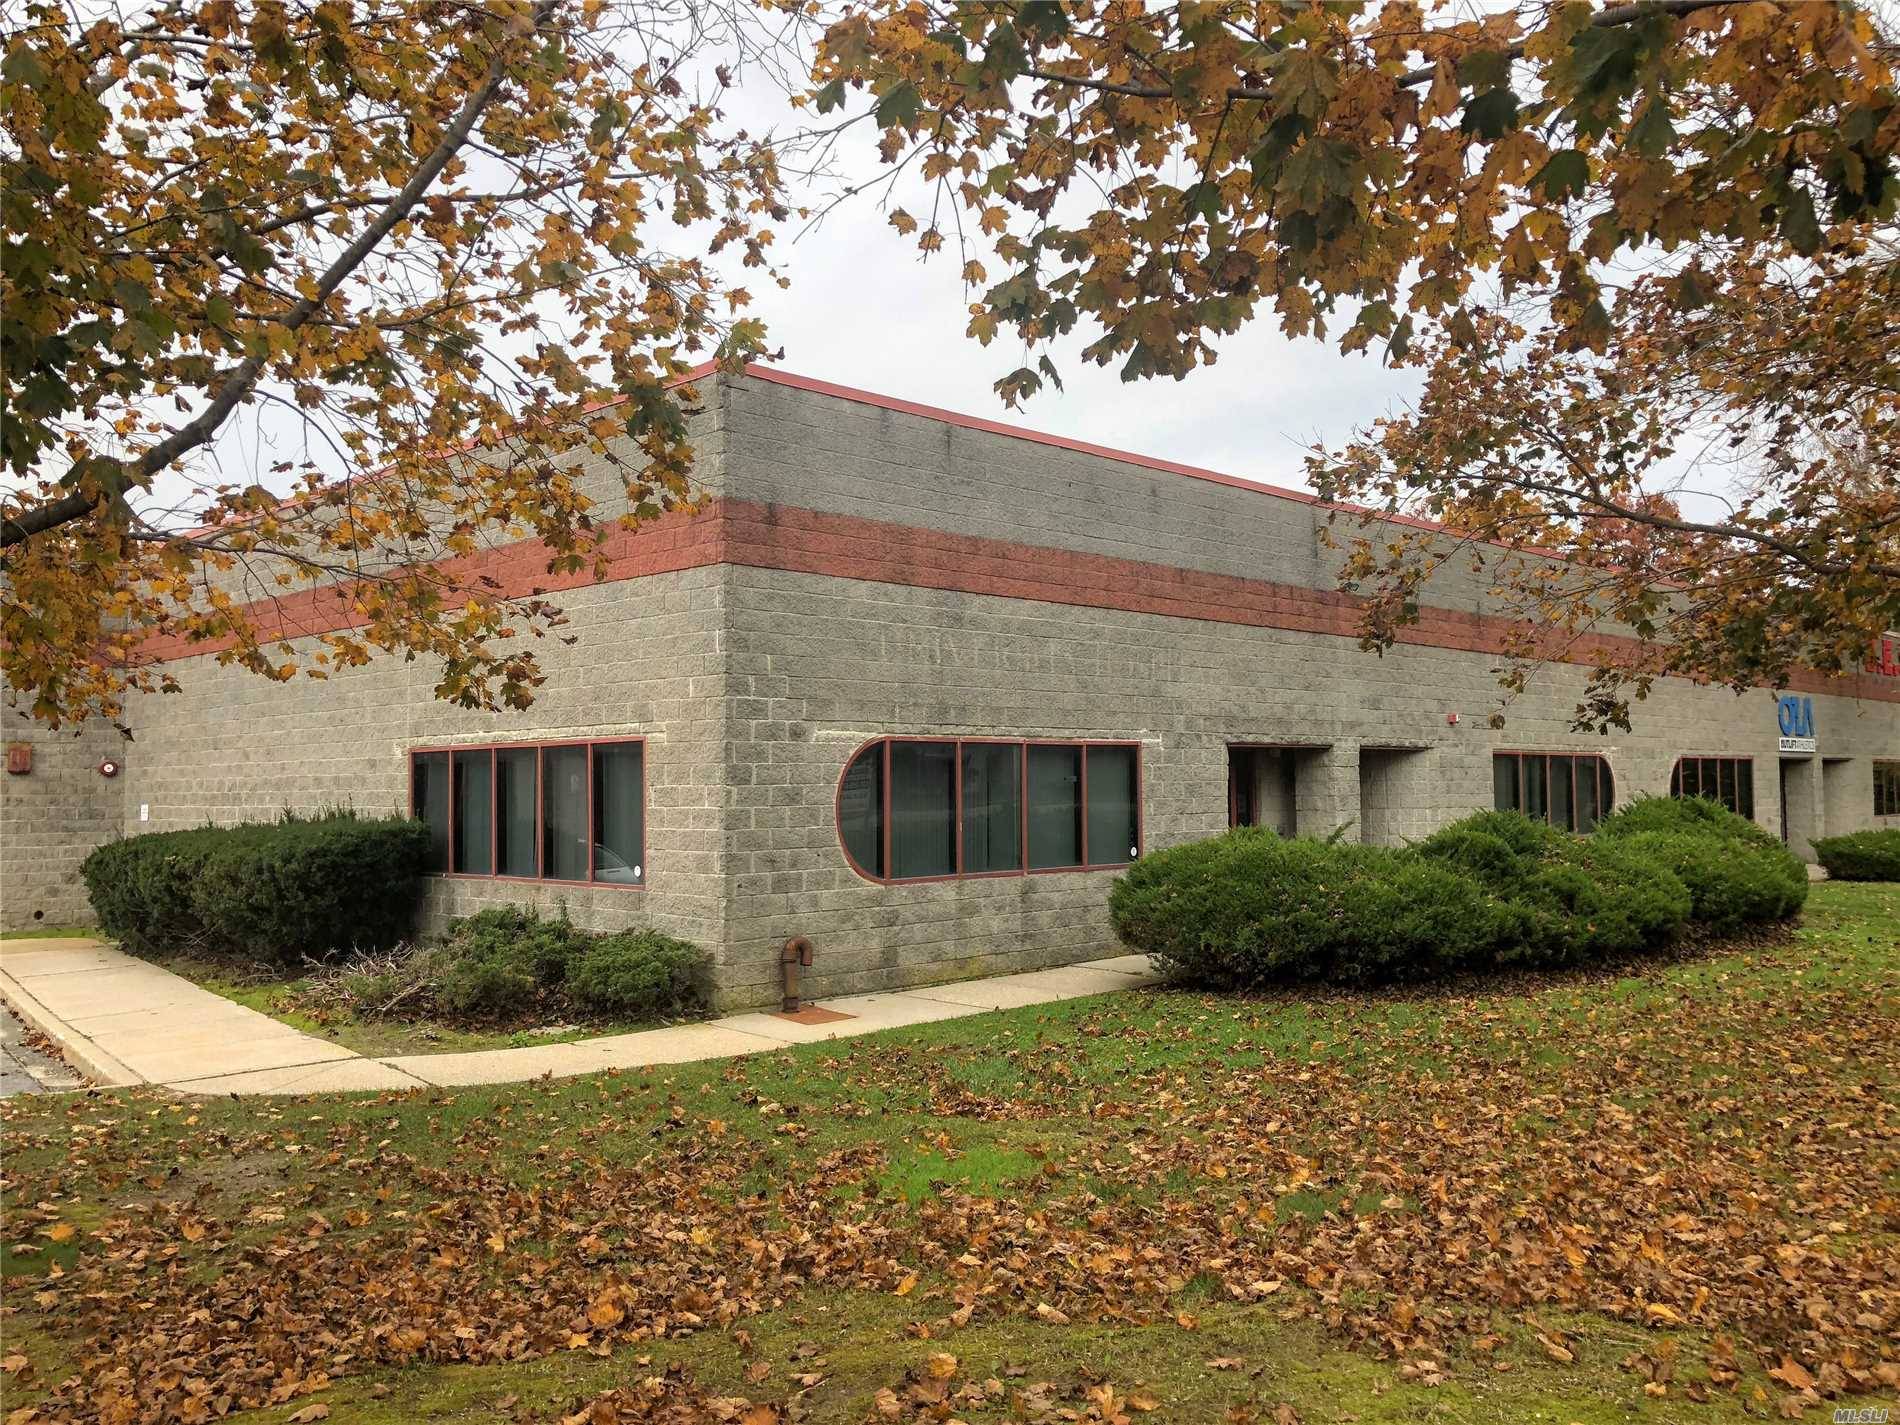 6800 S F Of Office Space, 10' Hung Ceiling, 18' Ceilings, Can Be Converted Back To Warehouse Space, Sprinkler System Throughout.